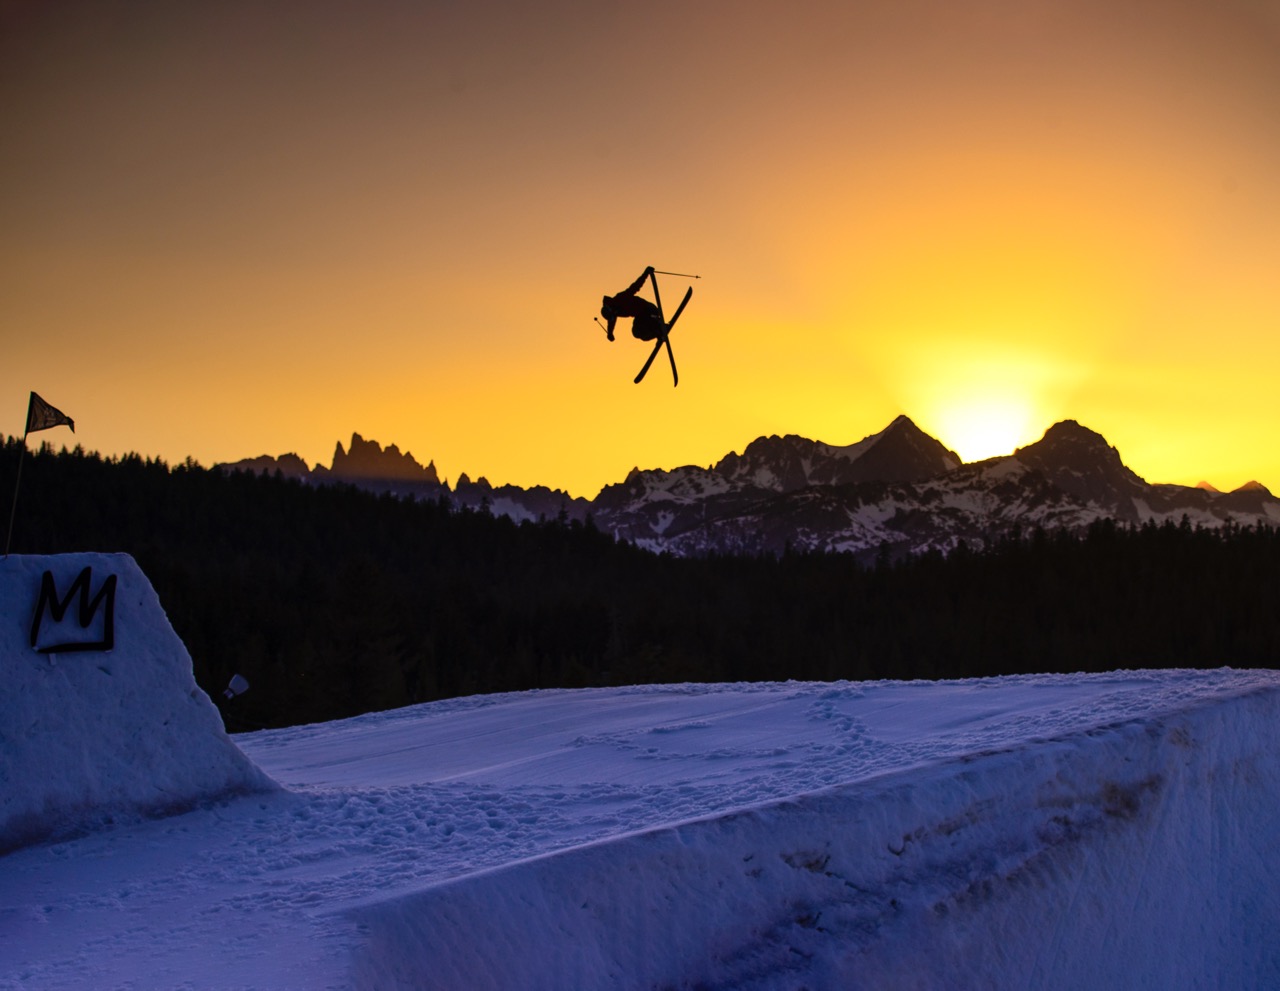 skier jumping in front of mountain sunset